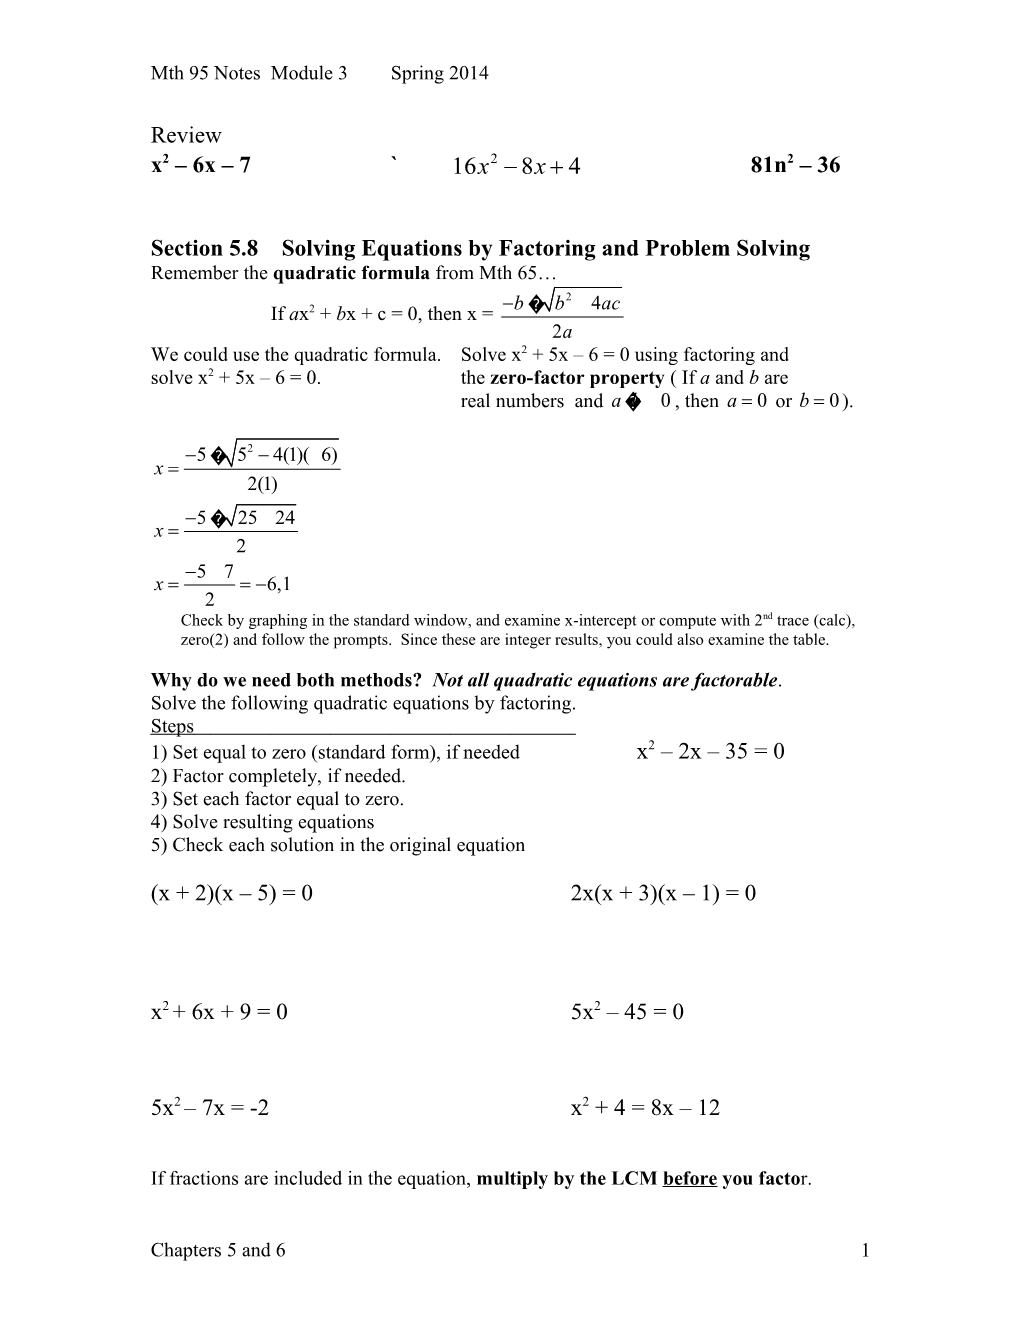 Section 5.8 Solving Equations by Factoring and Problem Solving